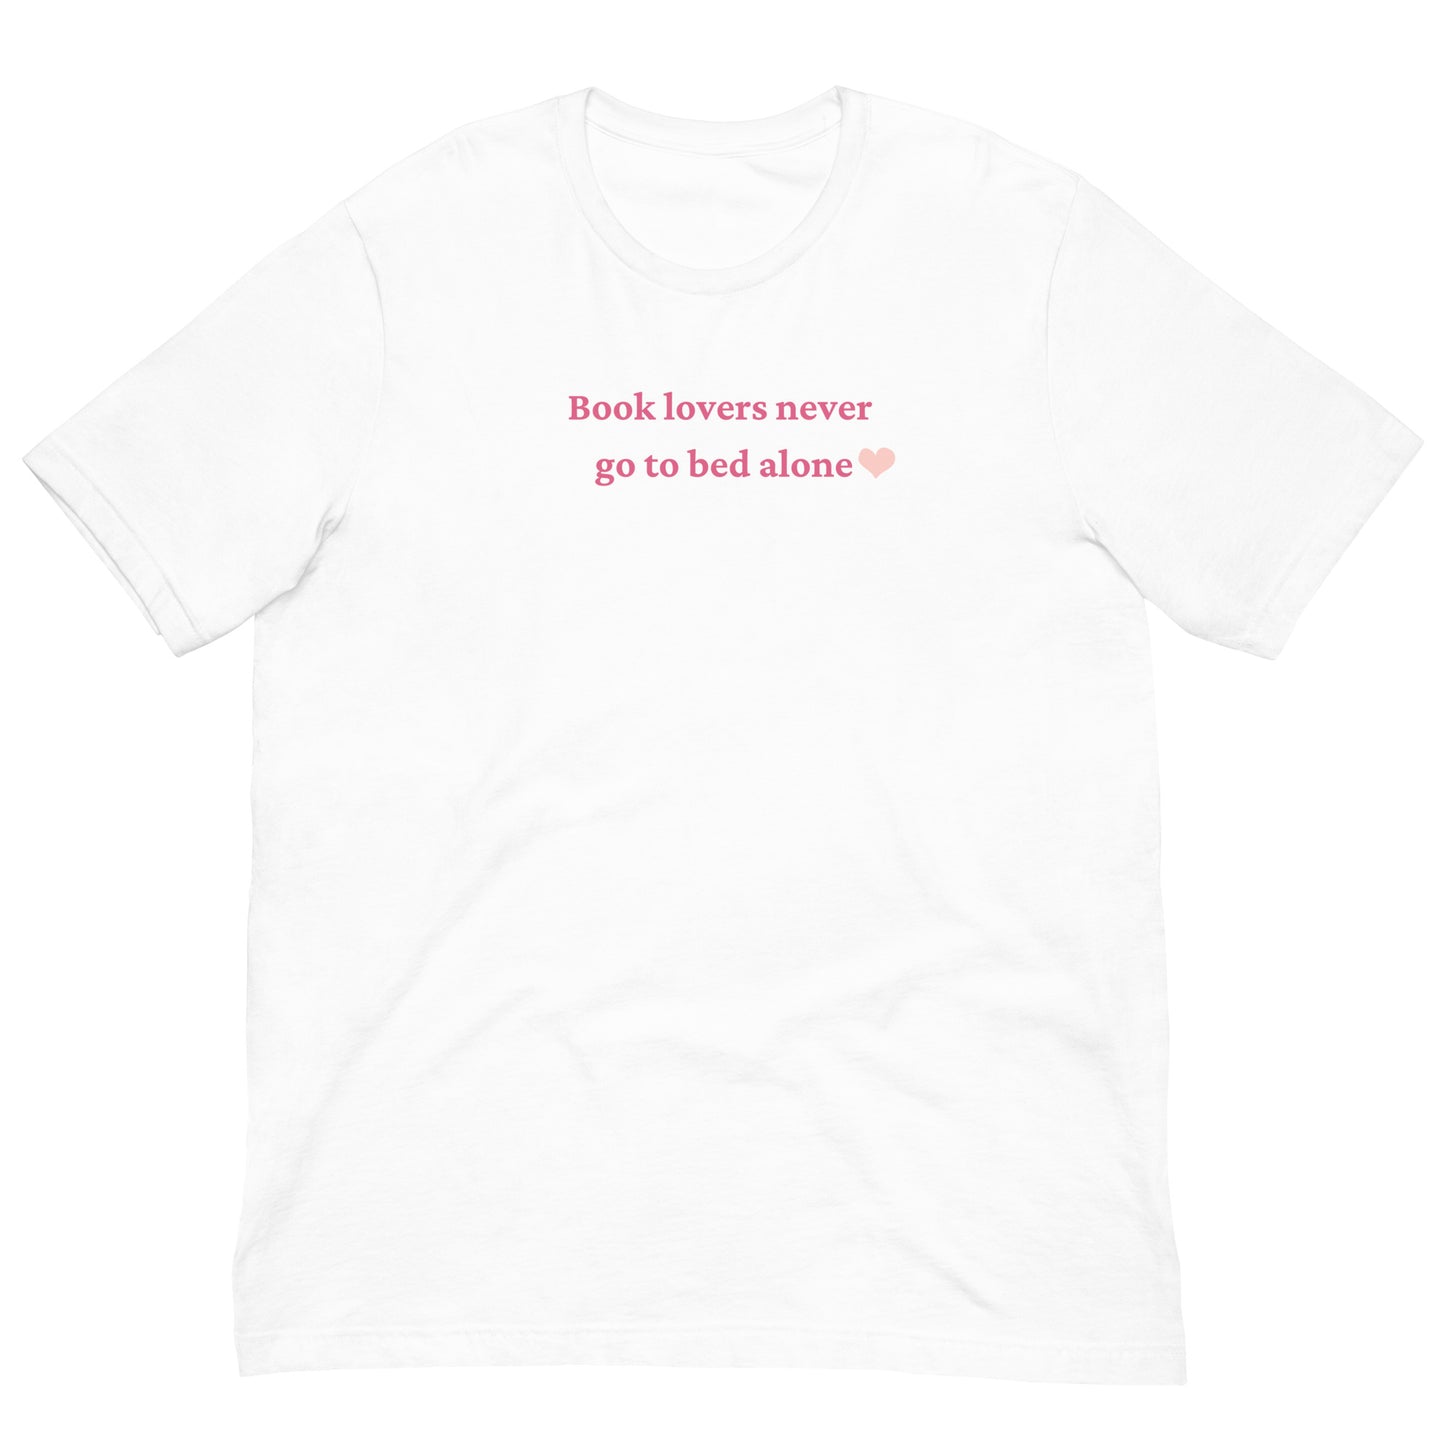 Book lovers never go to bed alone tee